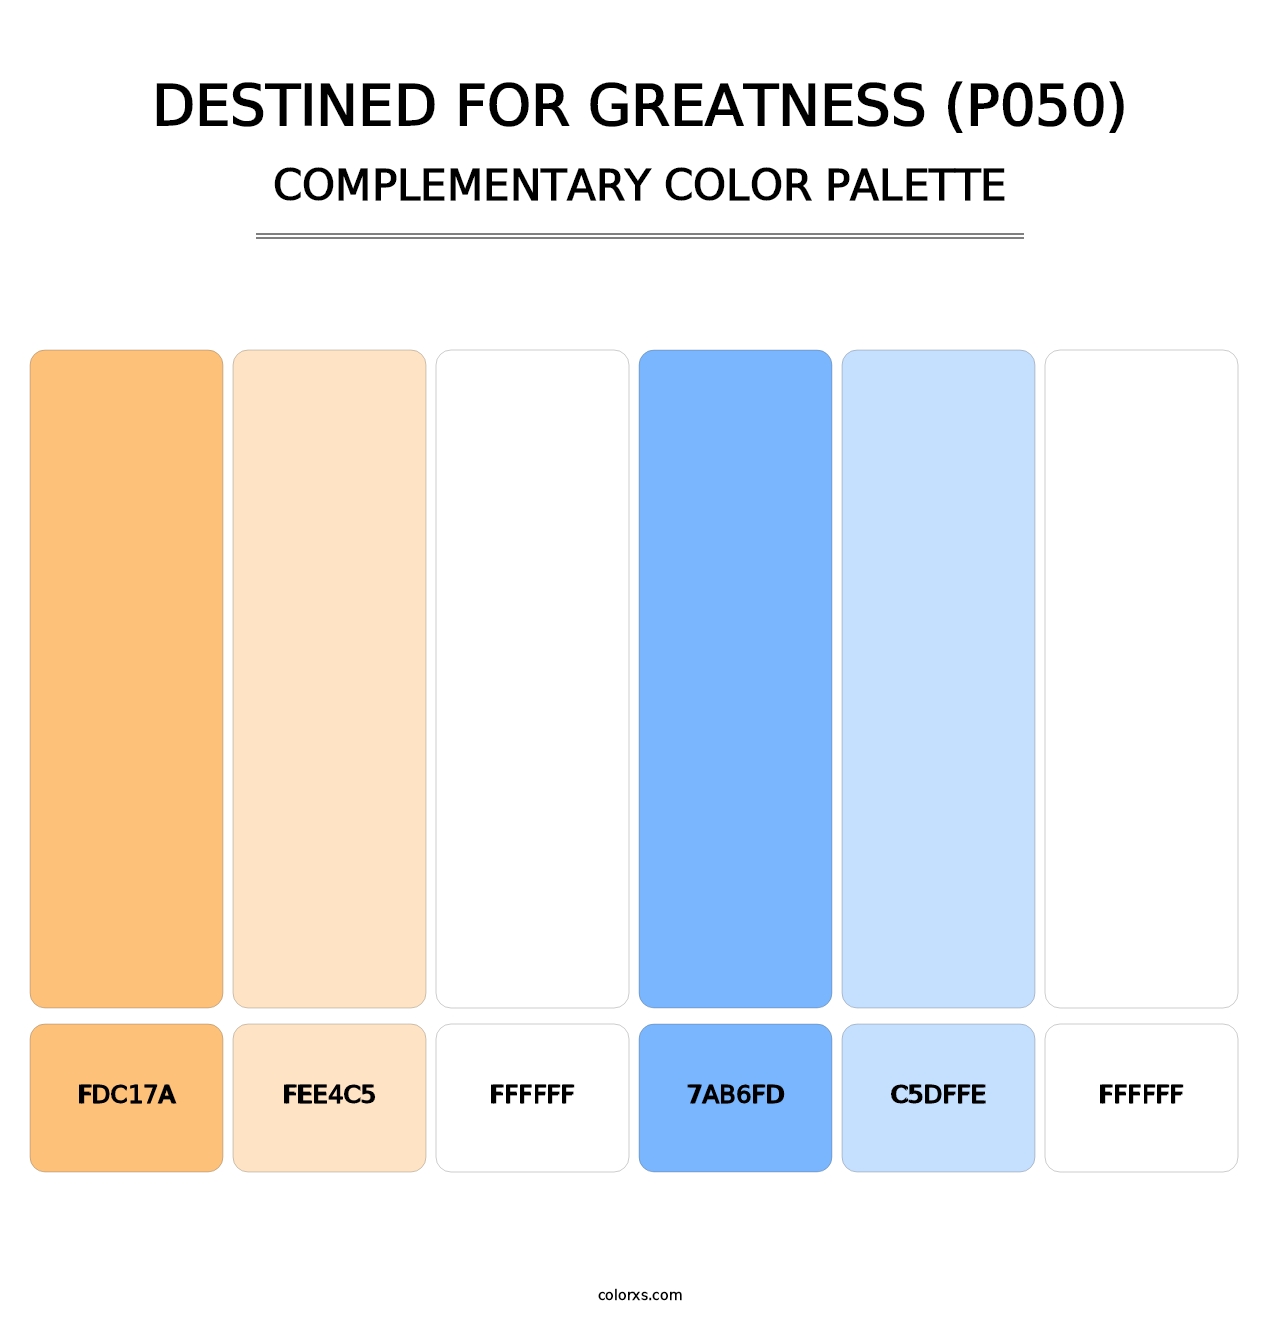 Destined for Greatness (P050) - Complementary Color Palette